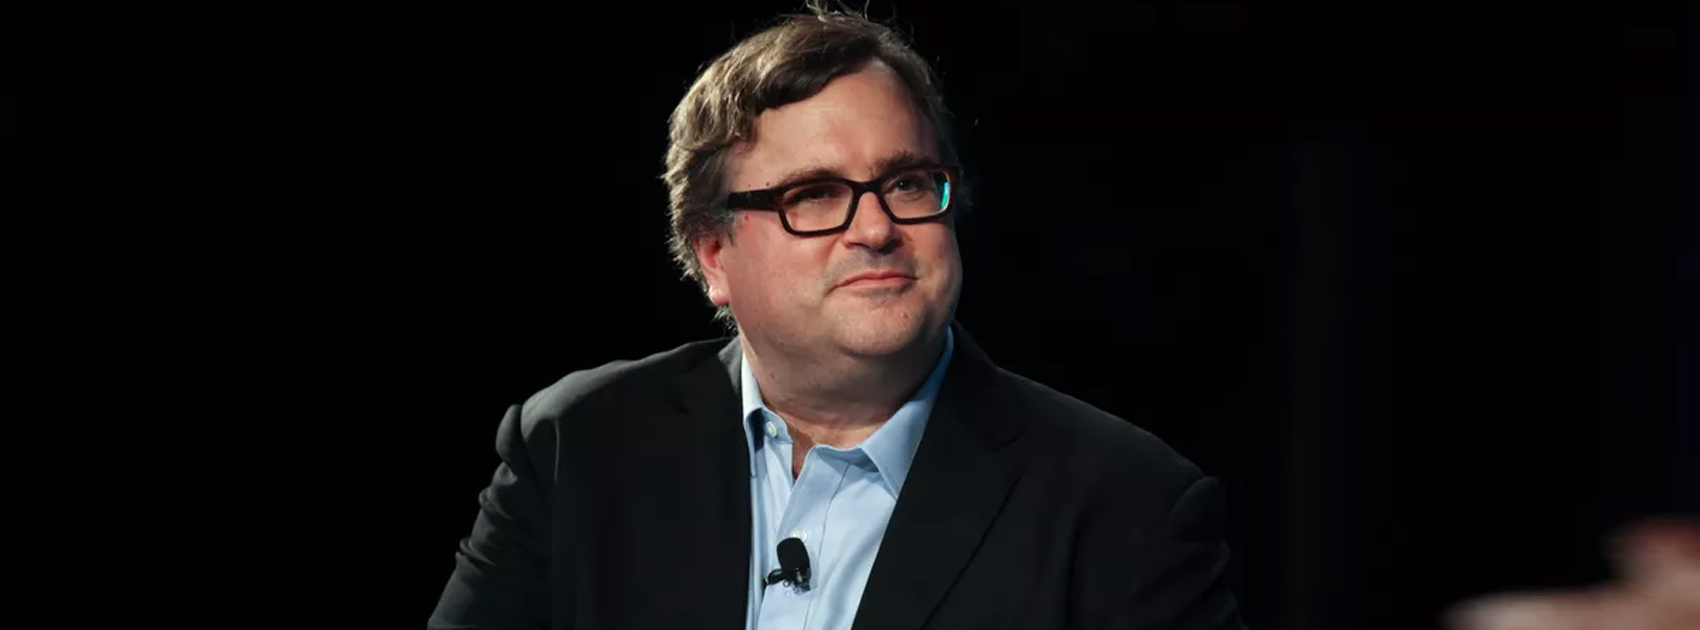 Reid Hoffman Unknown Facts,Inspiring Facts about Reid Hoffman, Interesting Facts 2019, Reid Hoffman Amazing Facts, Reid Hoffman Facts, Reid Hoffman Facts 2019, Reid Hoffman Interesting Facts, Reid Hoffman Latest News, Reid Hoffman Success Story, Most Interesting Facts, Real history of Reid Hoffman, startup stories, Surprising Facts About Reid Hoffman,linkedin founders